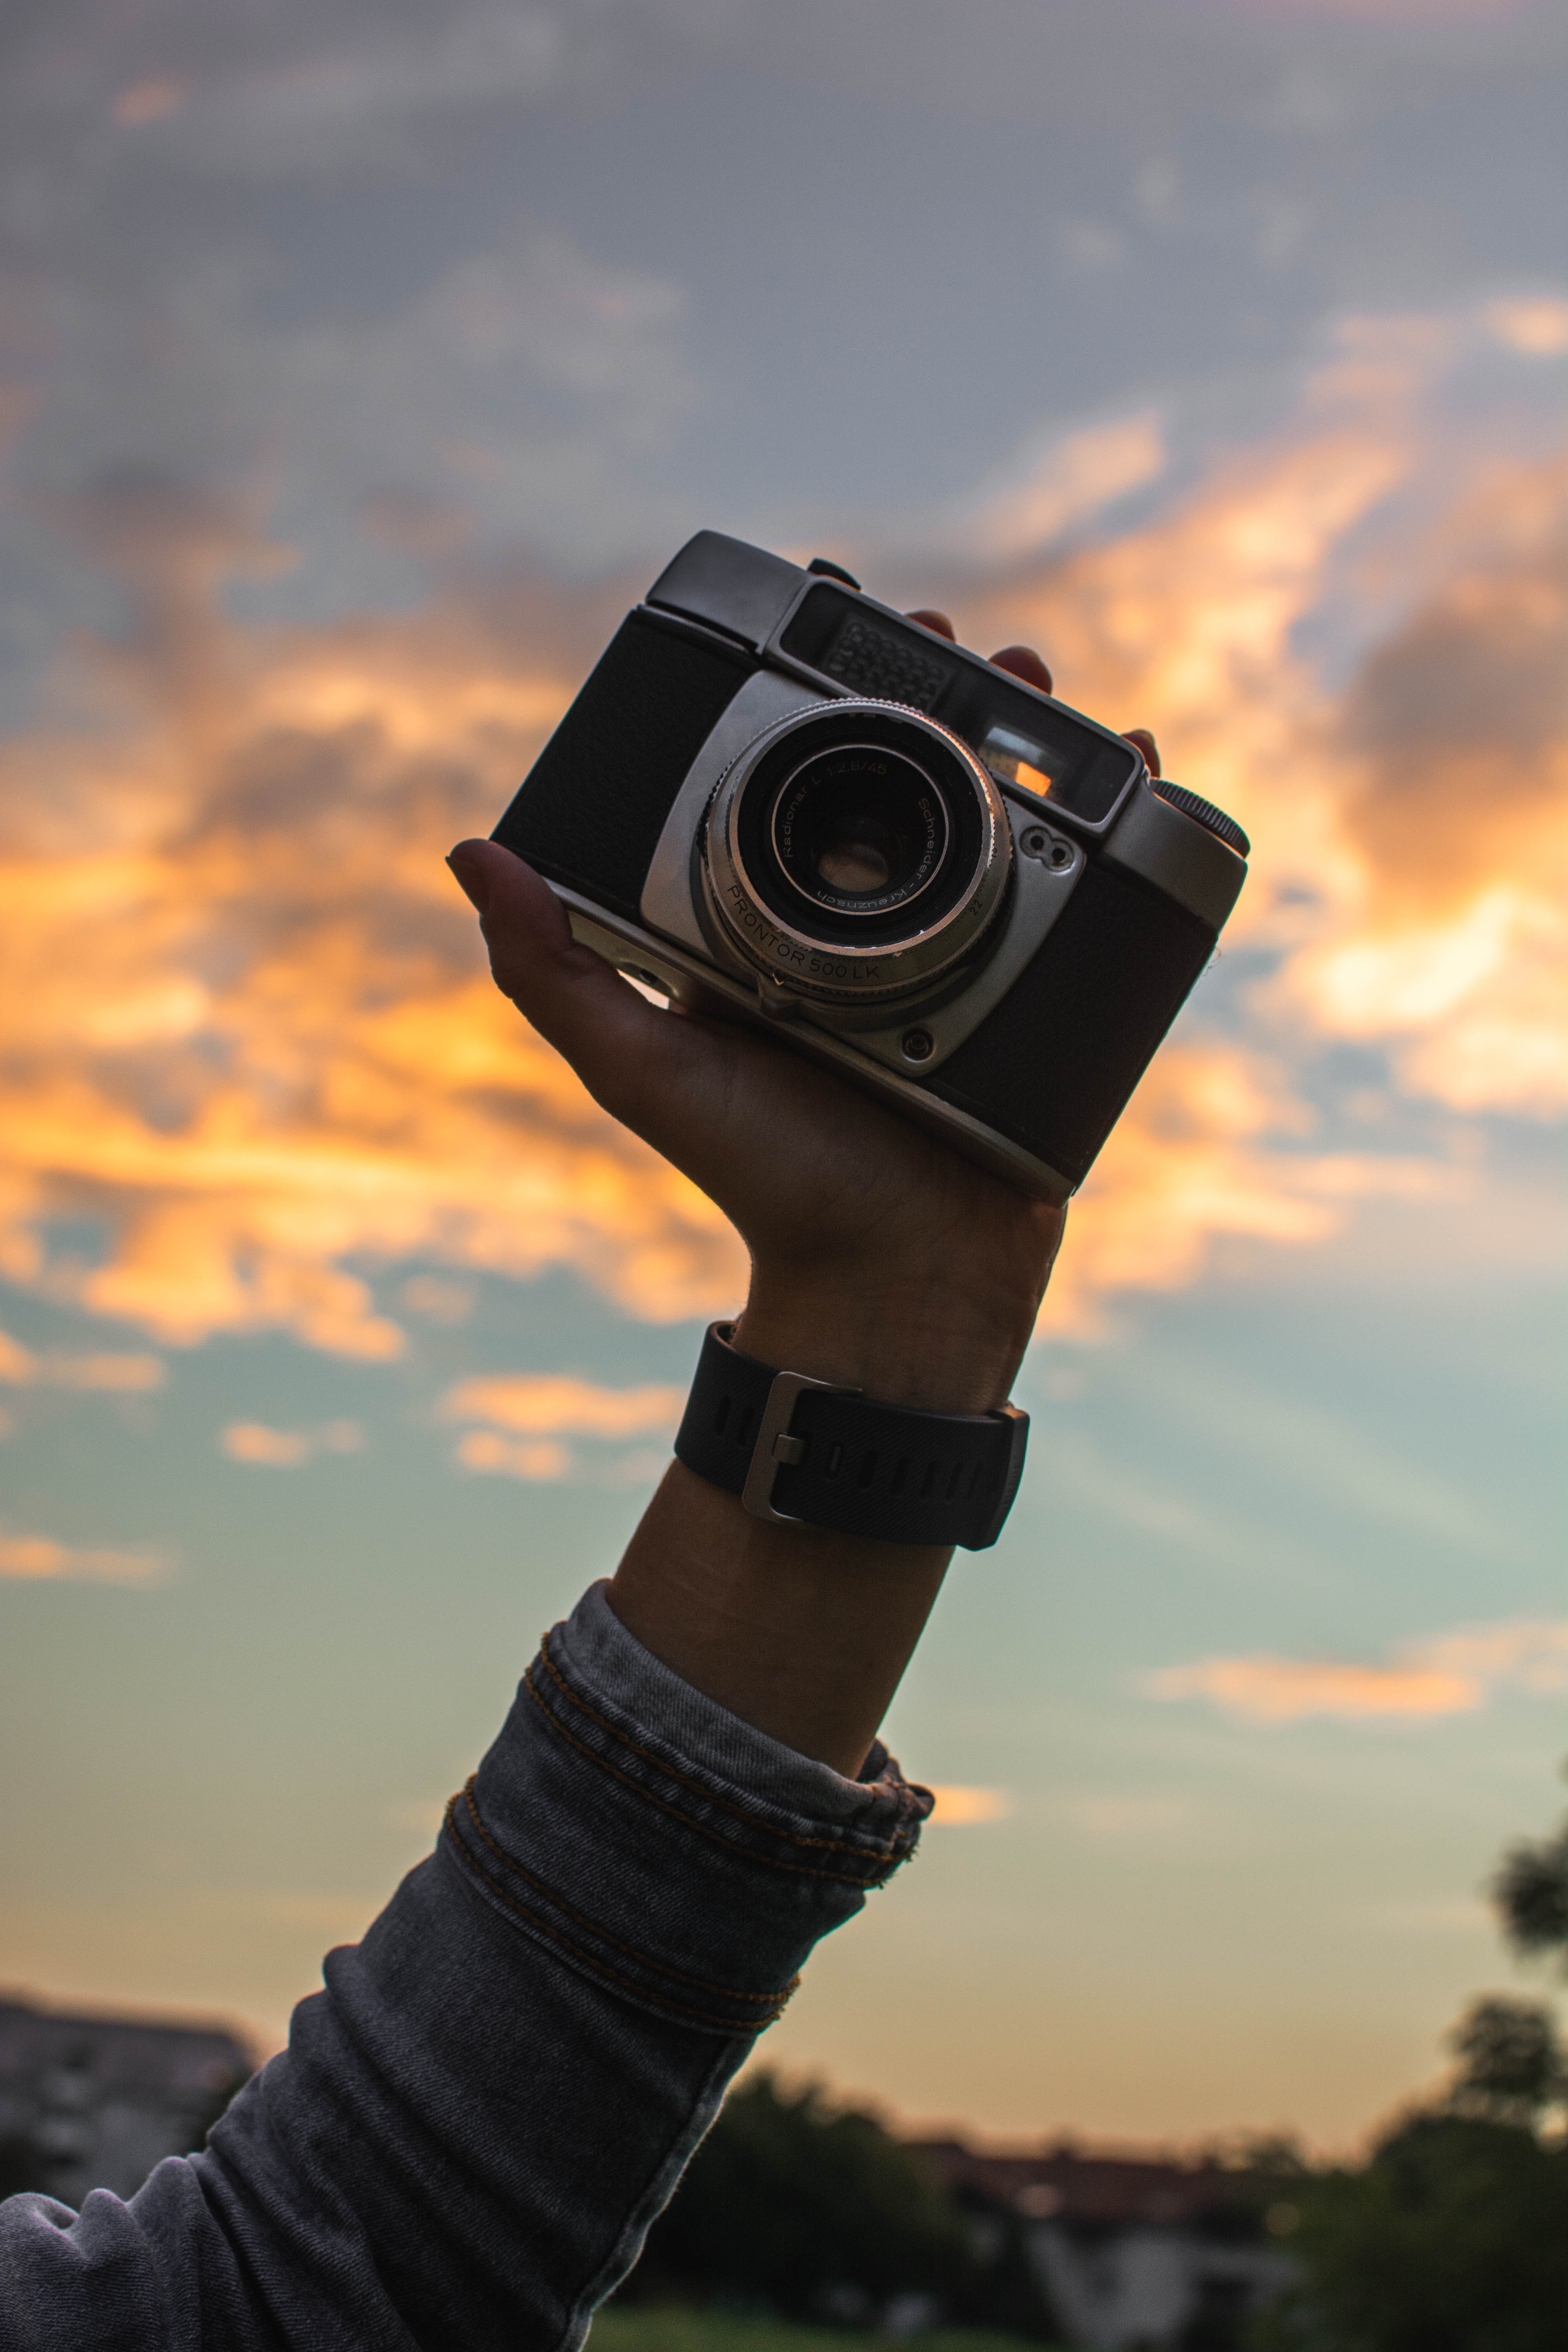 camera, photographer, sky, hand, technologies, technology images